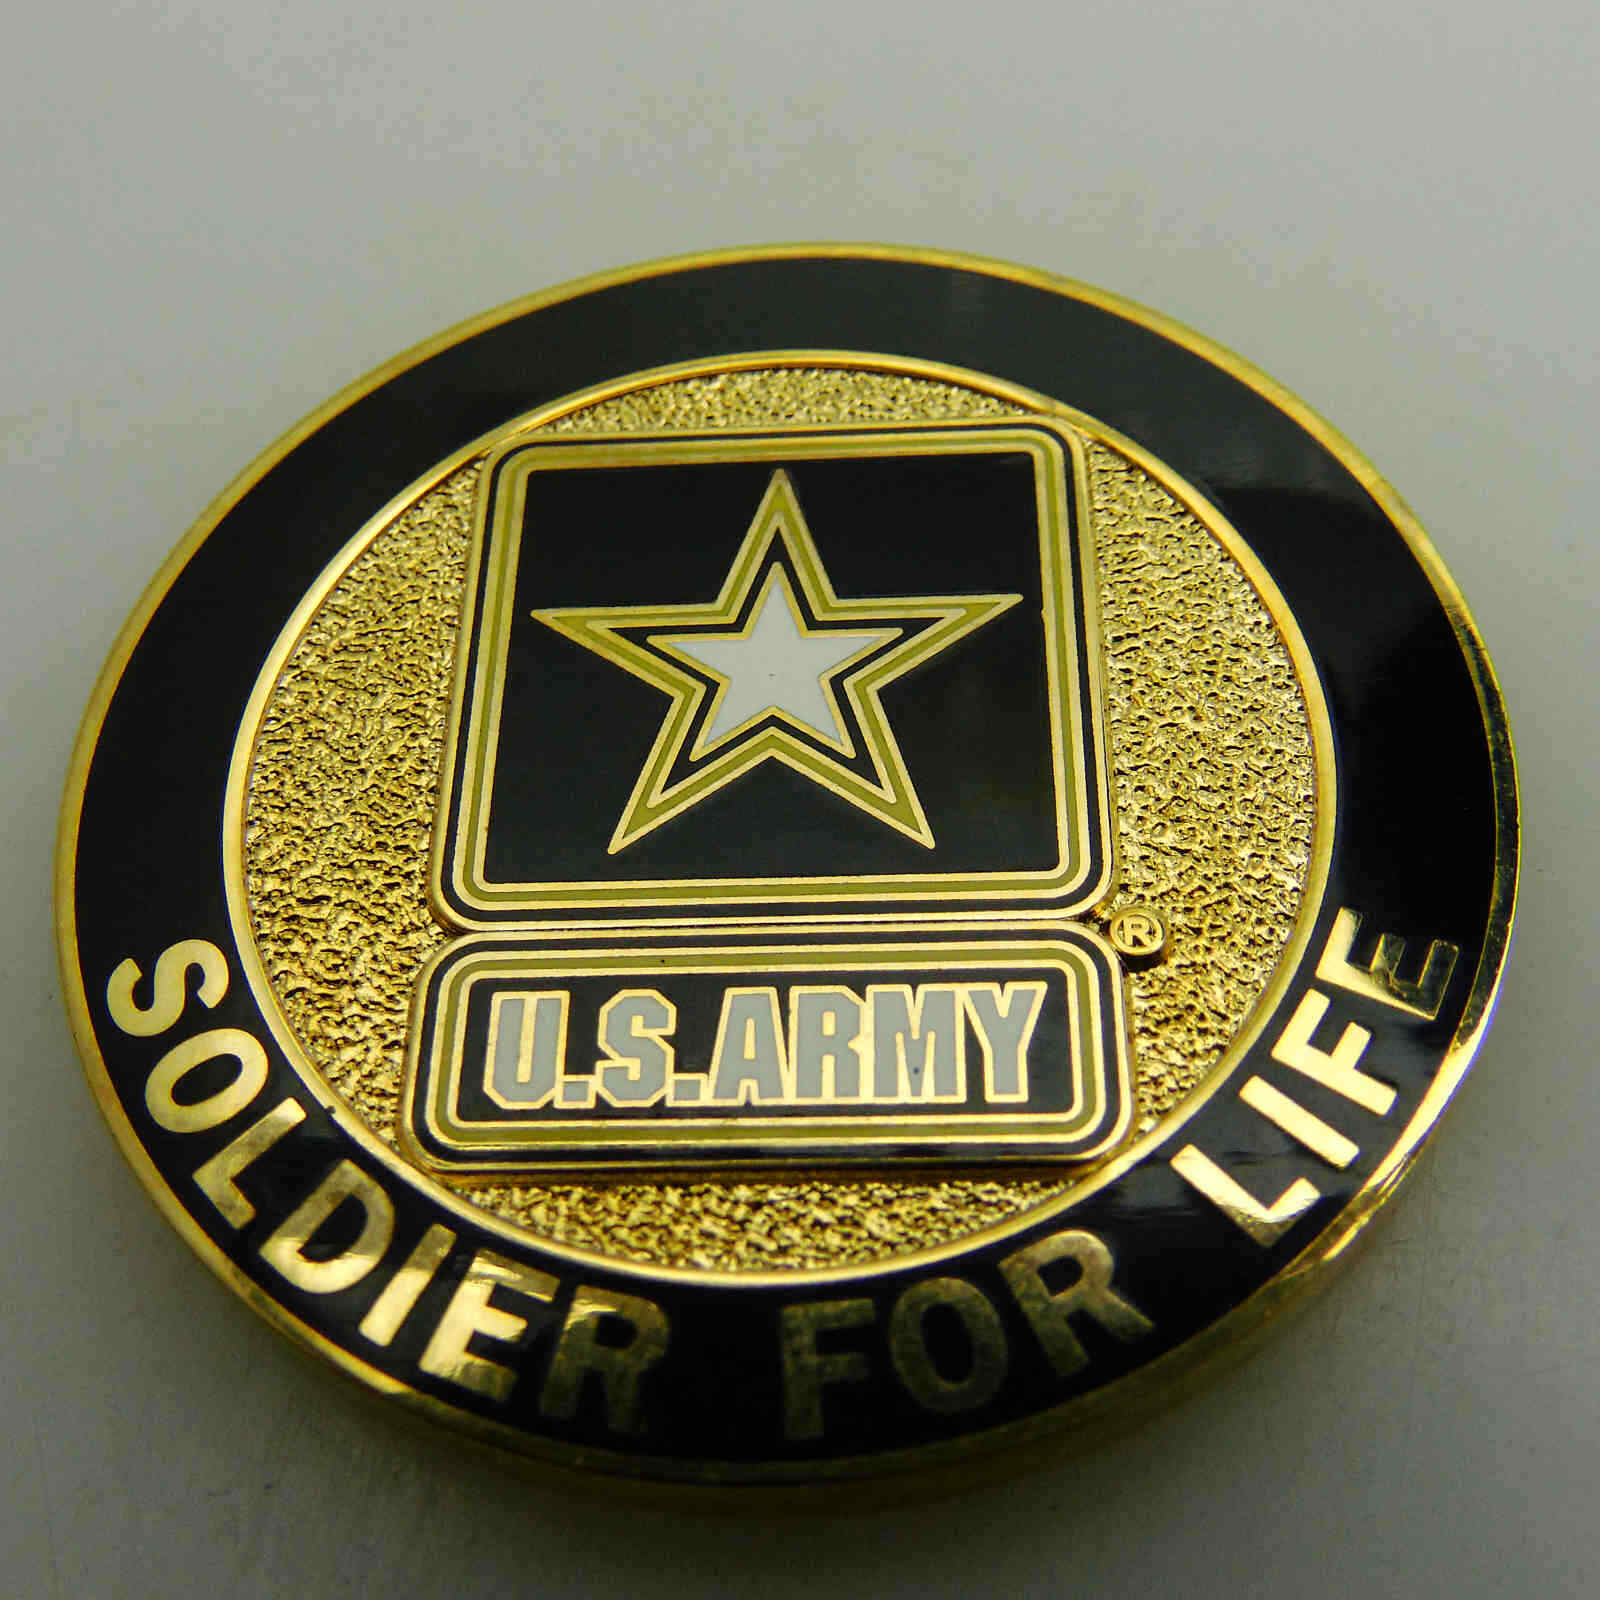 U.S.ARMY SOLDIER FOR LIFE PRTVATE FIRST CLASS CHALLENGE COIN